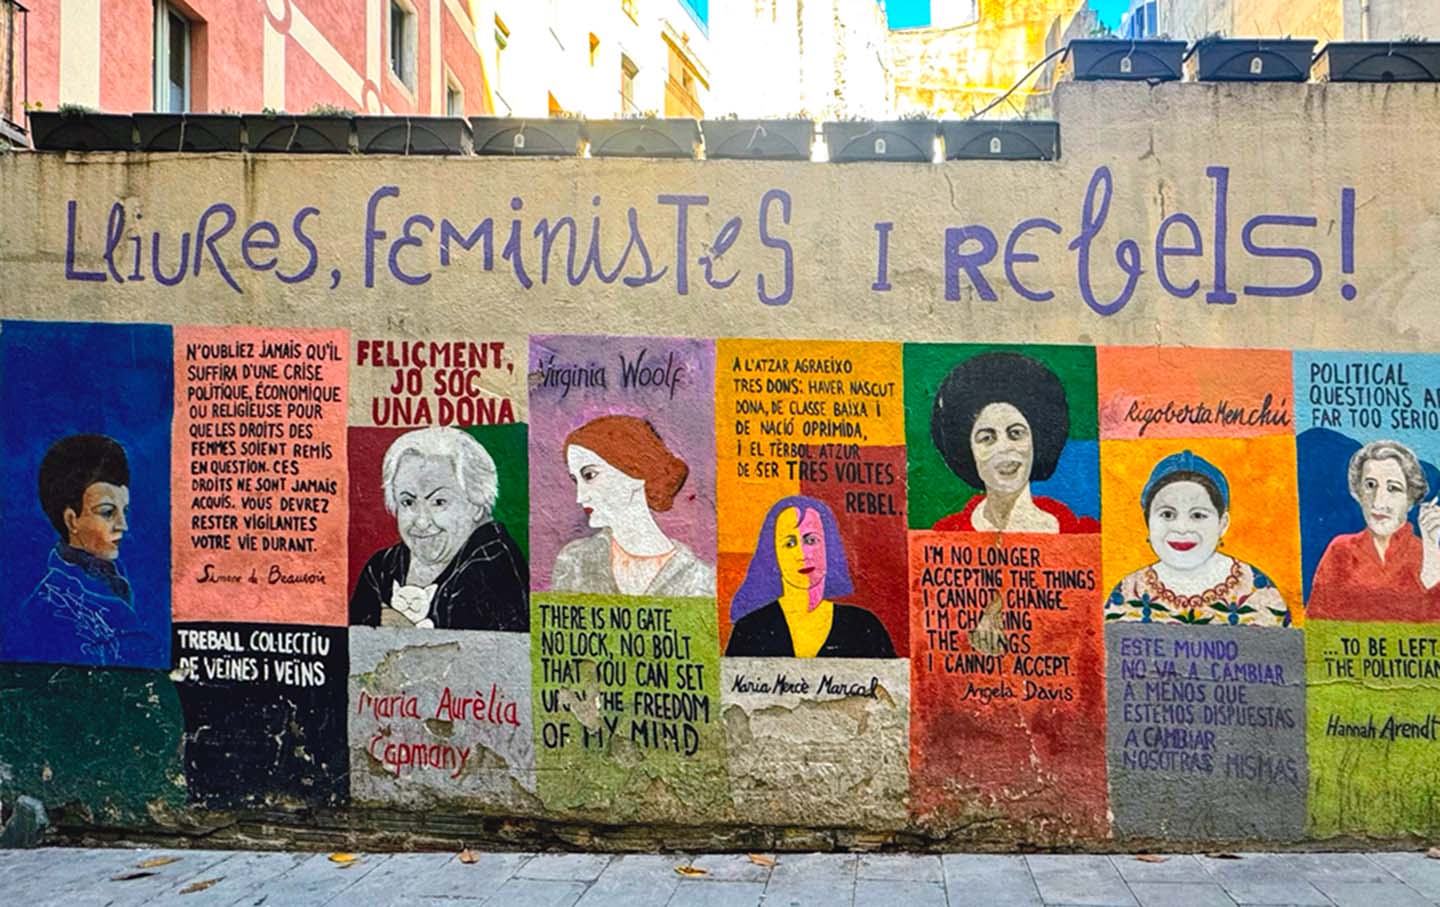 Free, Feminists and Rebels